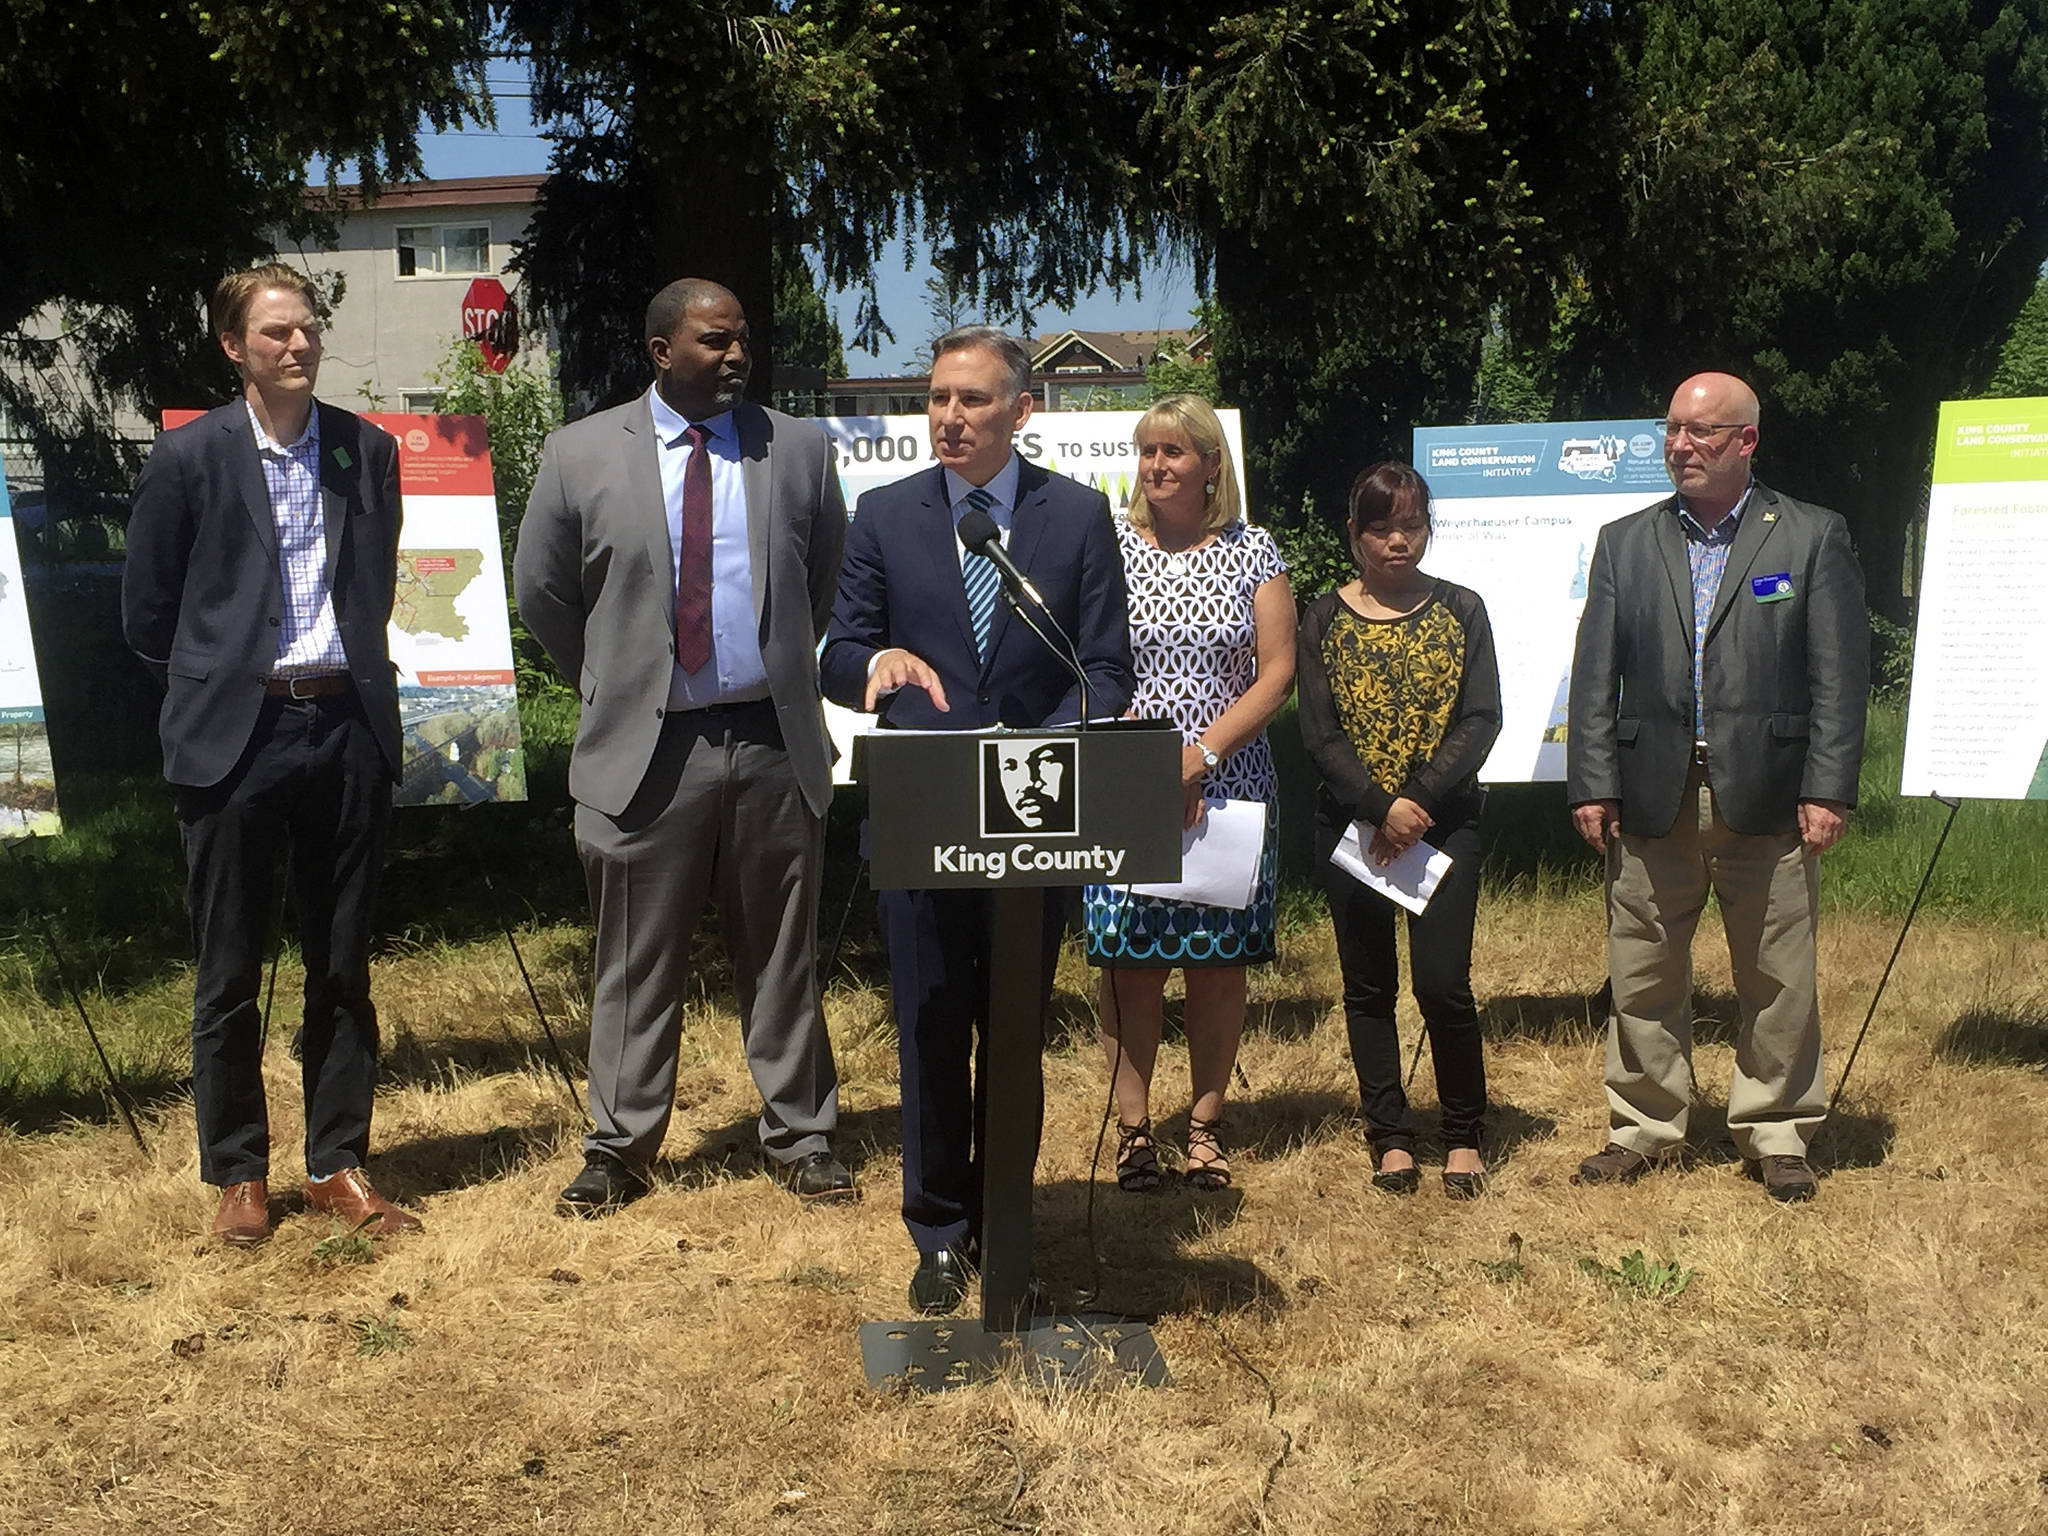 King County Executive Dow Constantine announced his plan to buy up 65,000 acres of land for conservation at a May 23 press conference in Tukwila. Photo by Josh Kelety